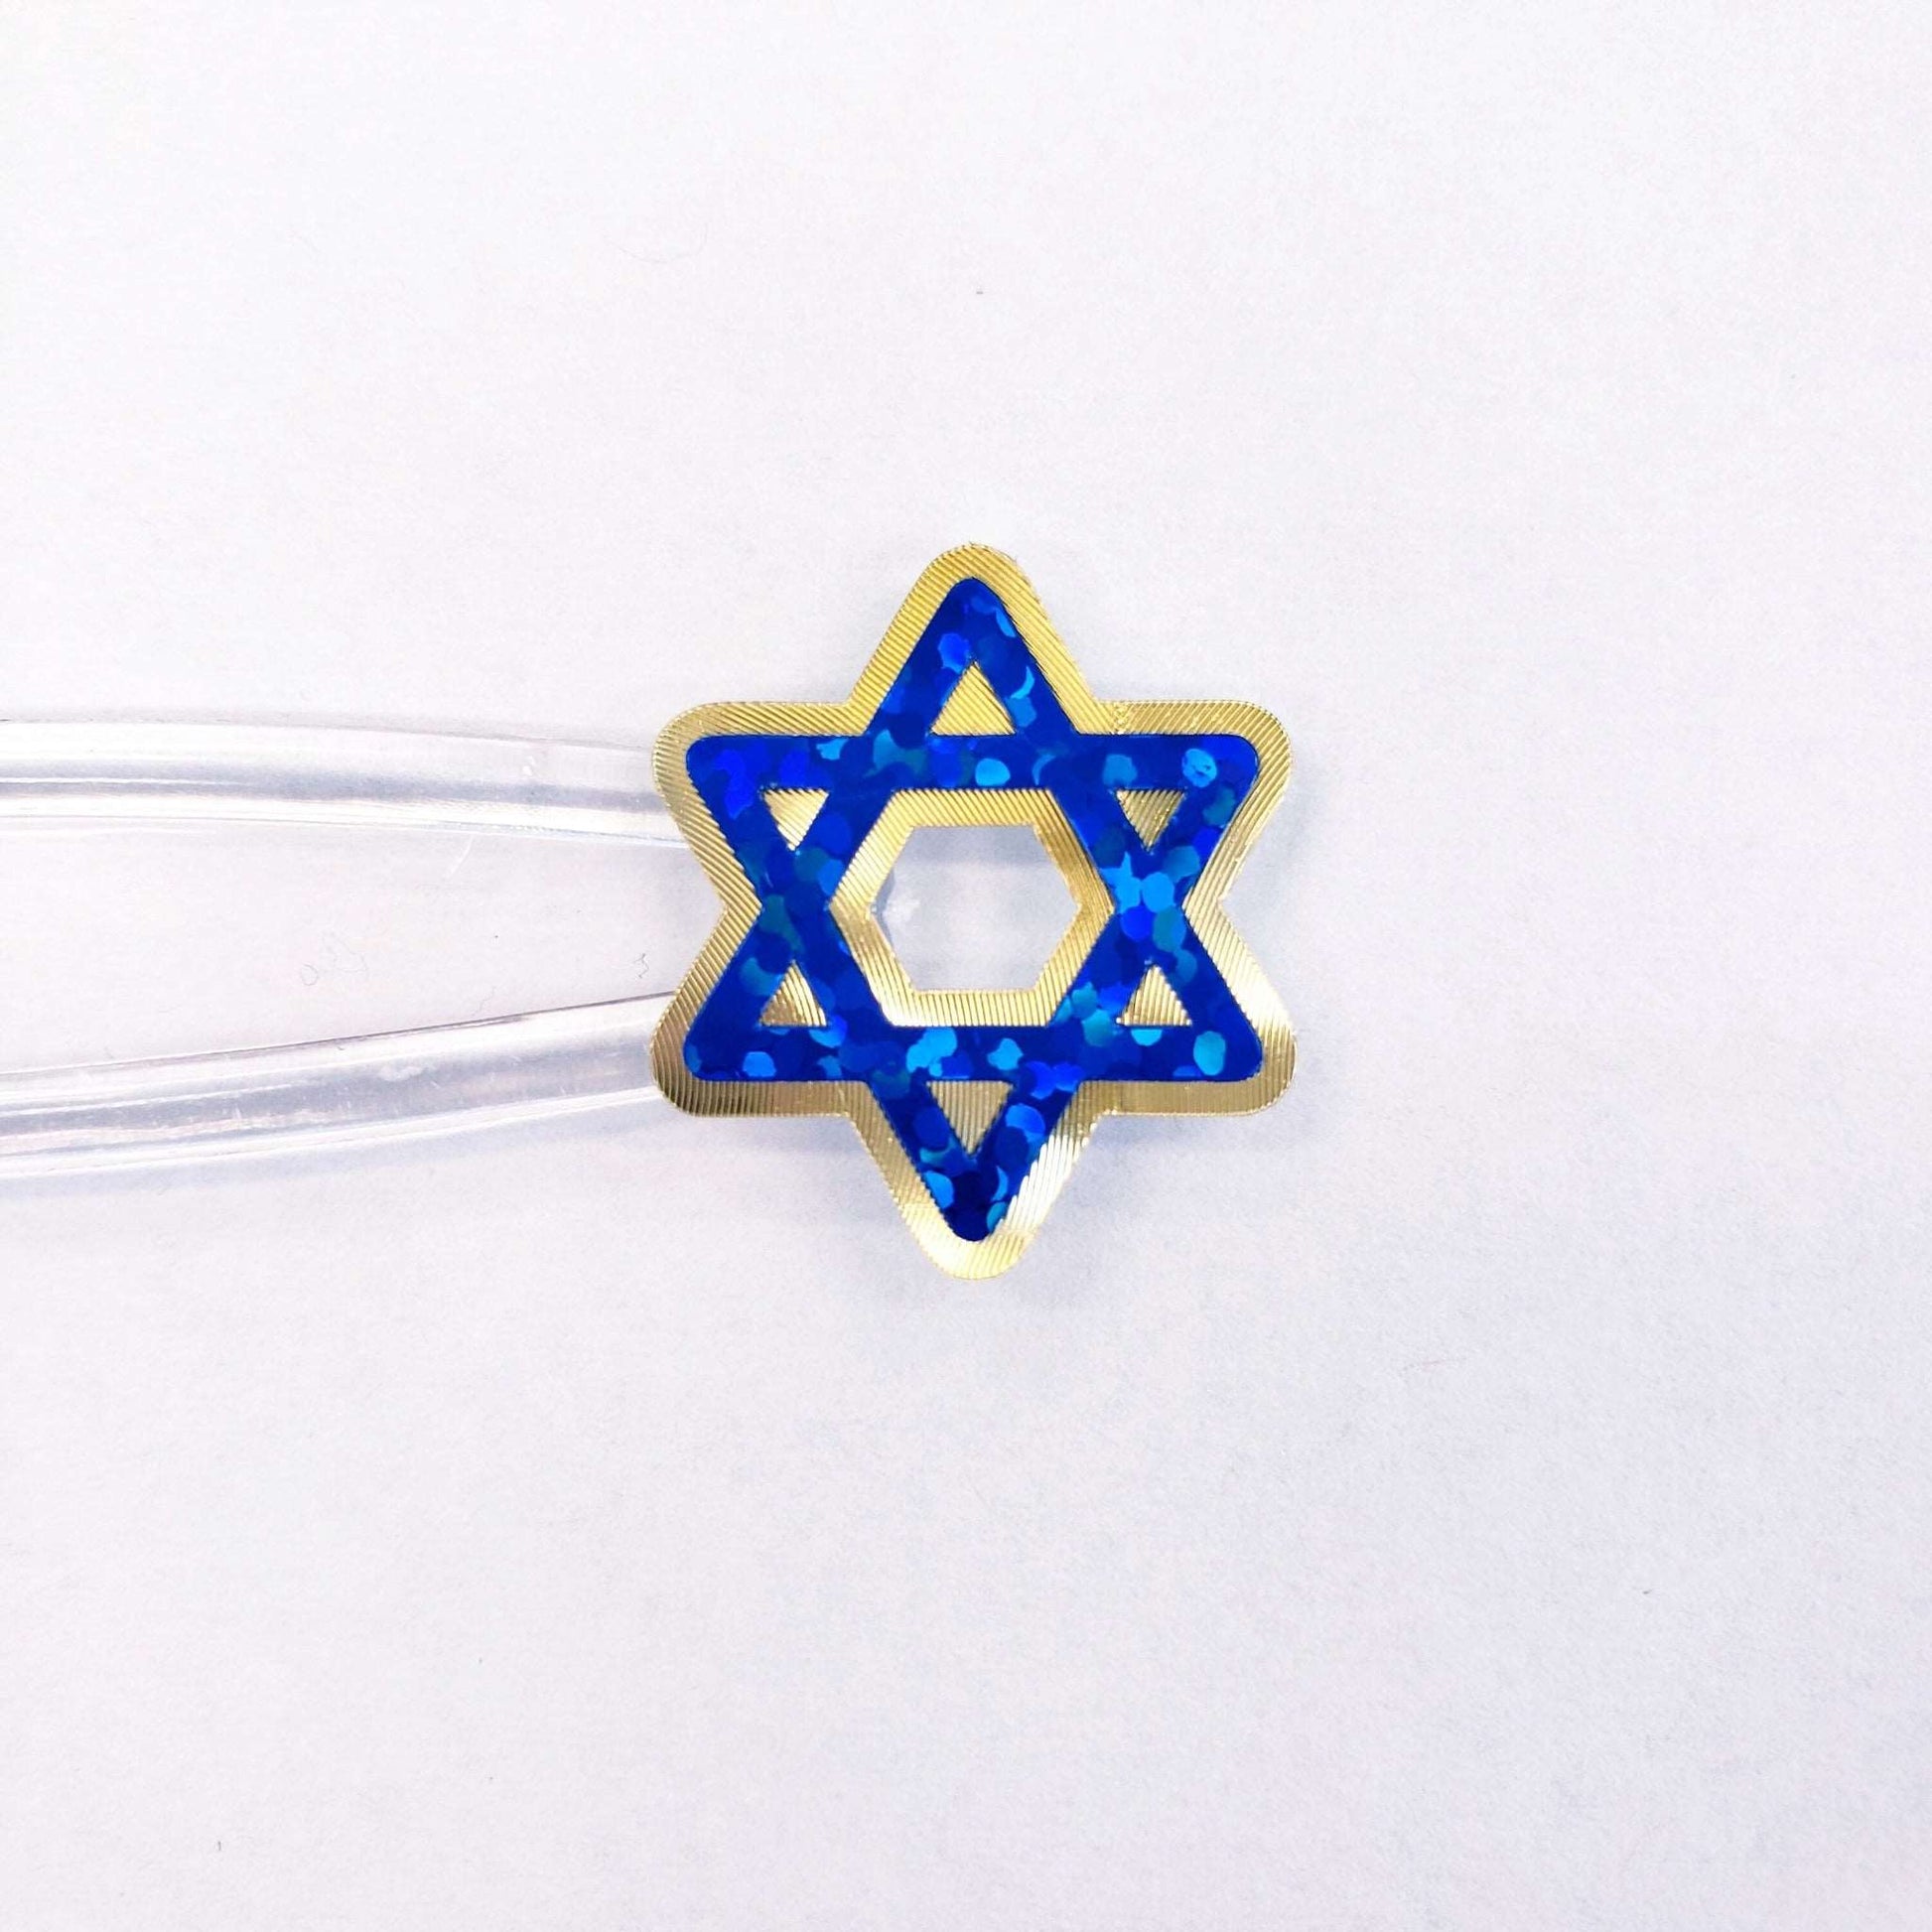 Star of David Stickers, set of 40 sparkly blue and gold six-point star stickers for cards, invitations, Hanukkah, Bar and Bat Mitzvah stars.